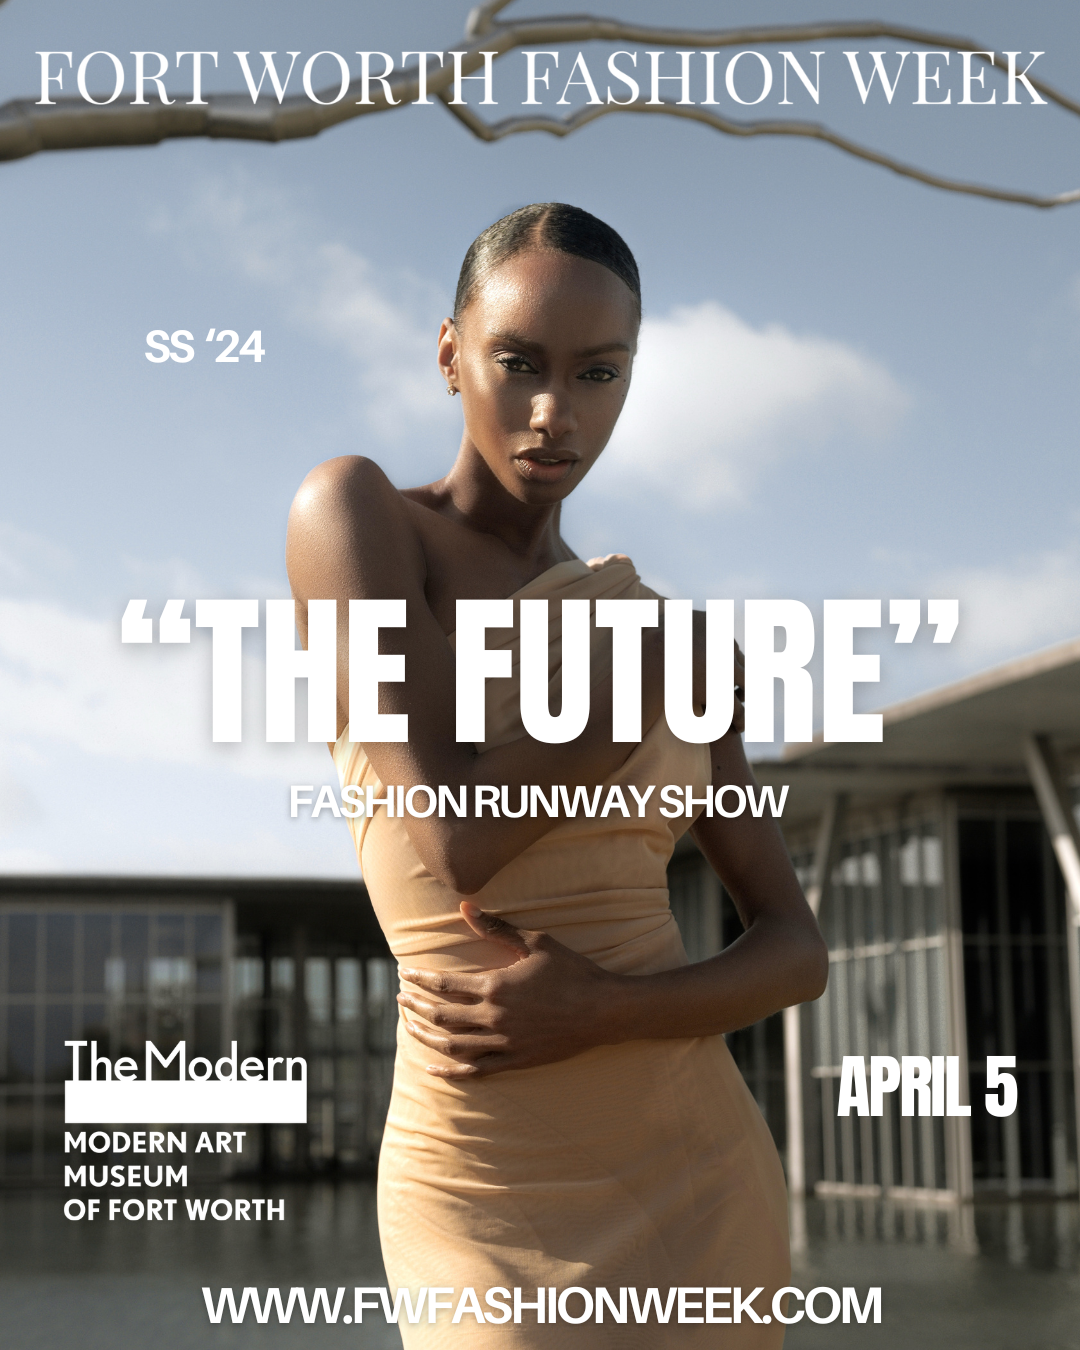 “The Future” Fashion Runway Show at the Modern Art Museum